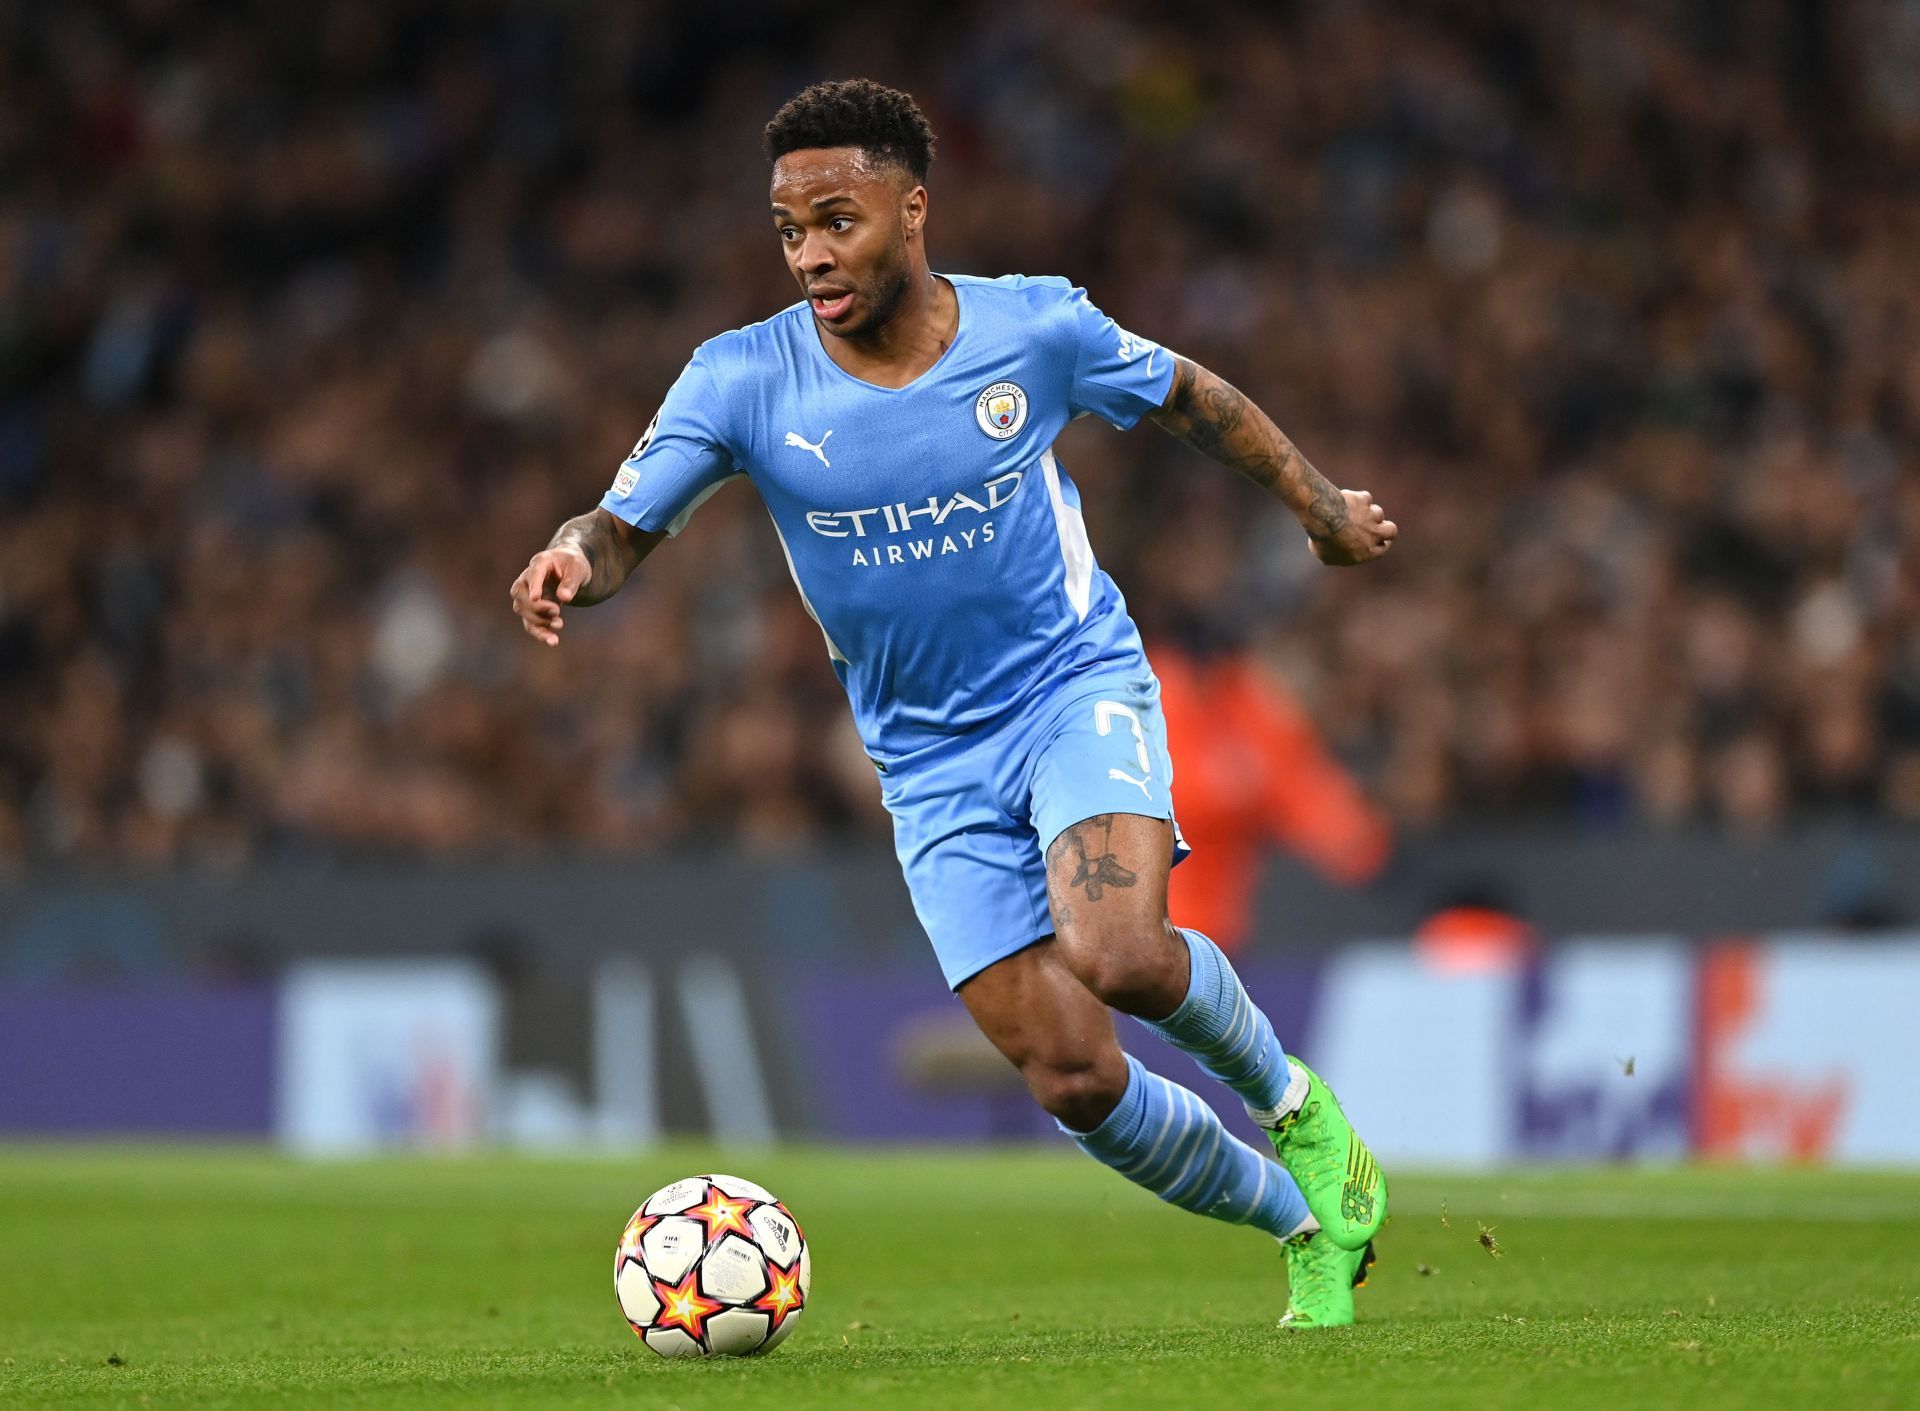 Raheem Sterling has been linked with a move away from Manchester City